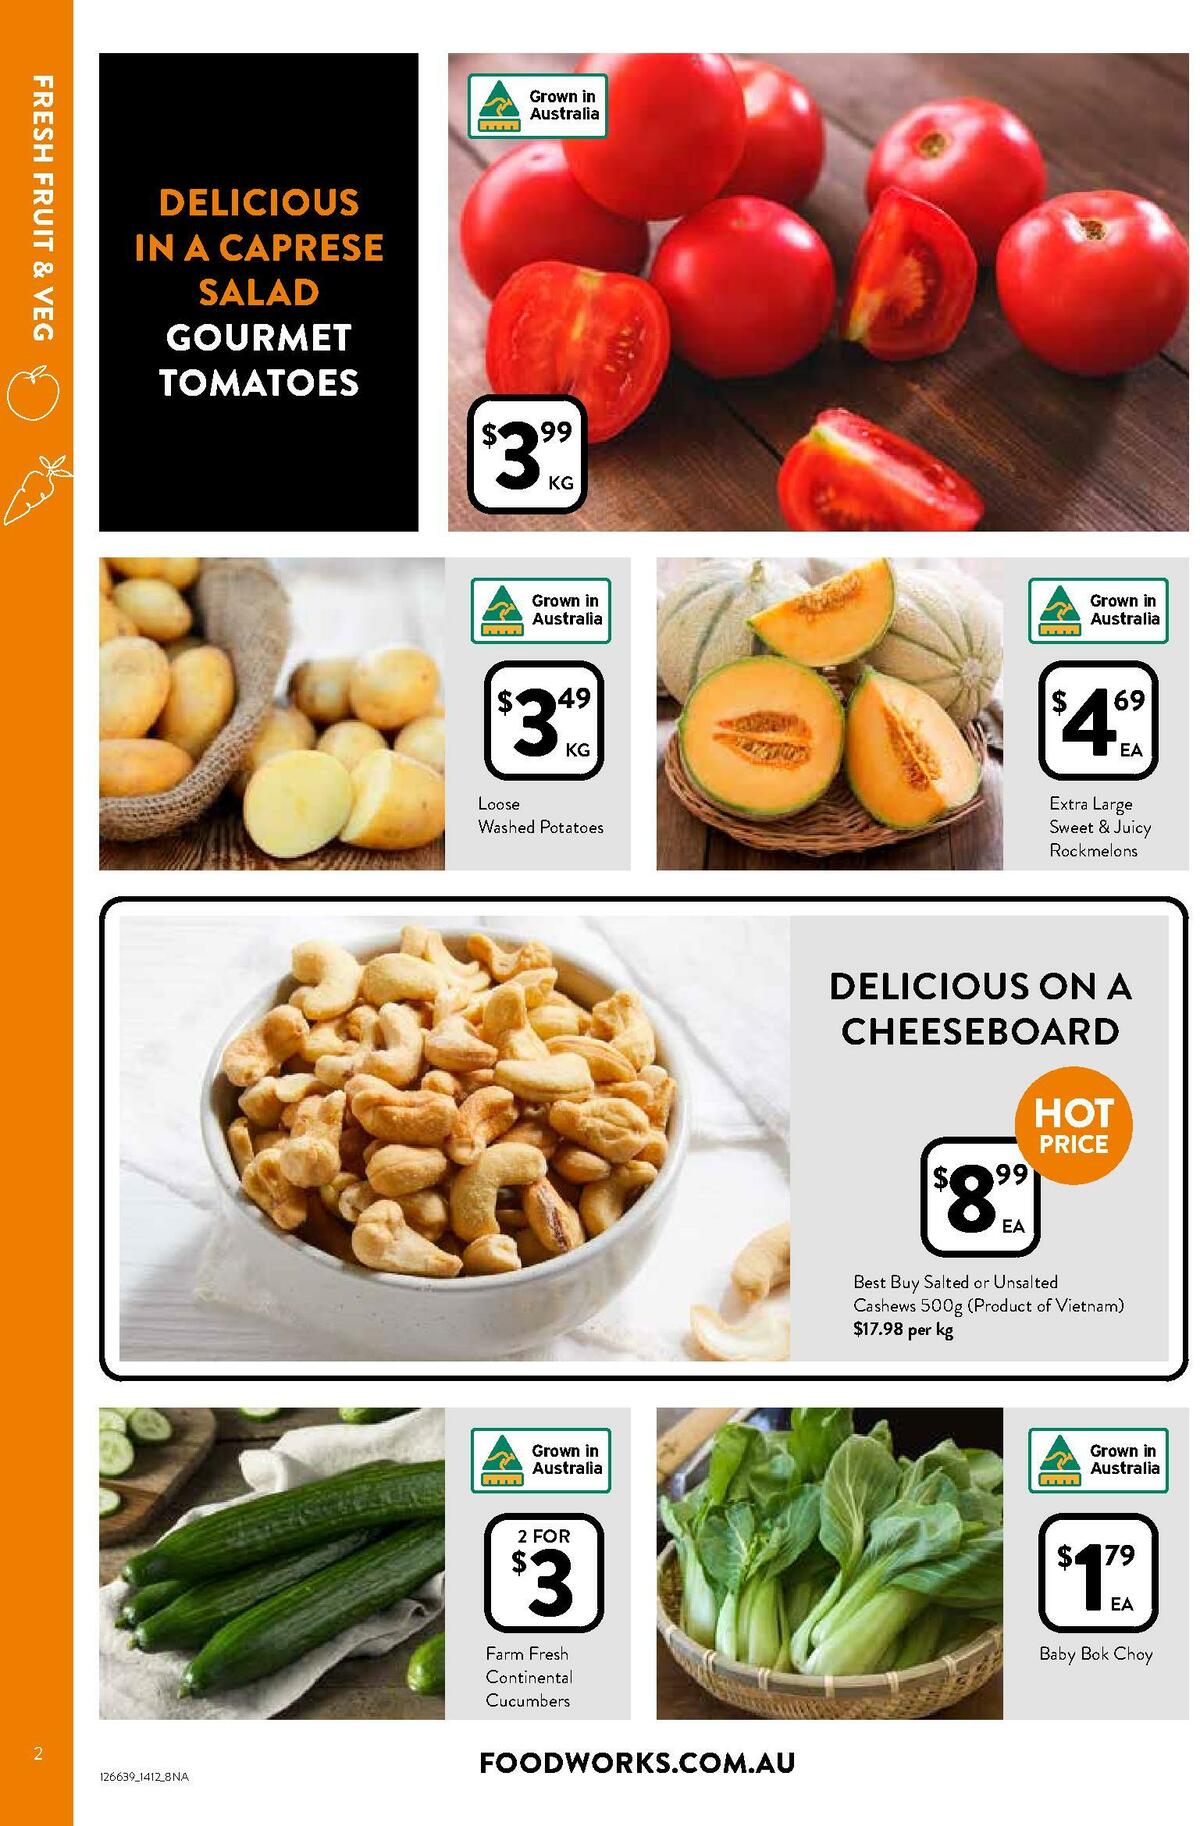 FoodWorks Catalogues from 14 December